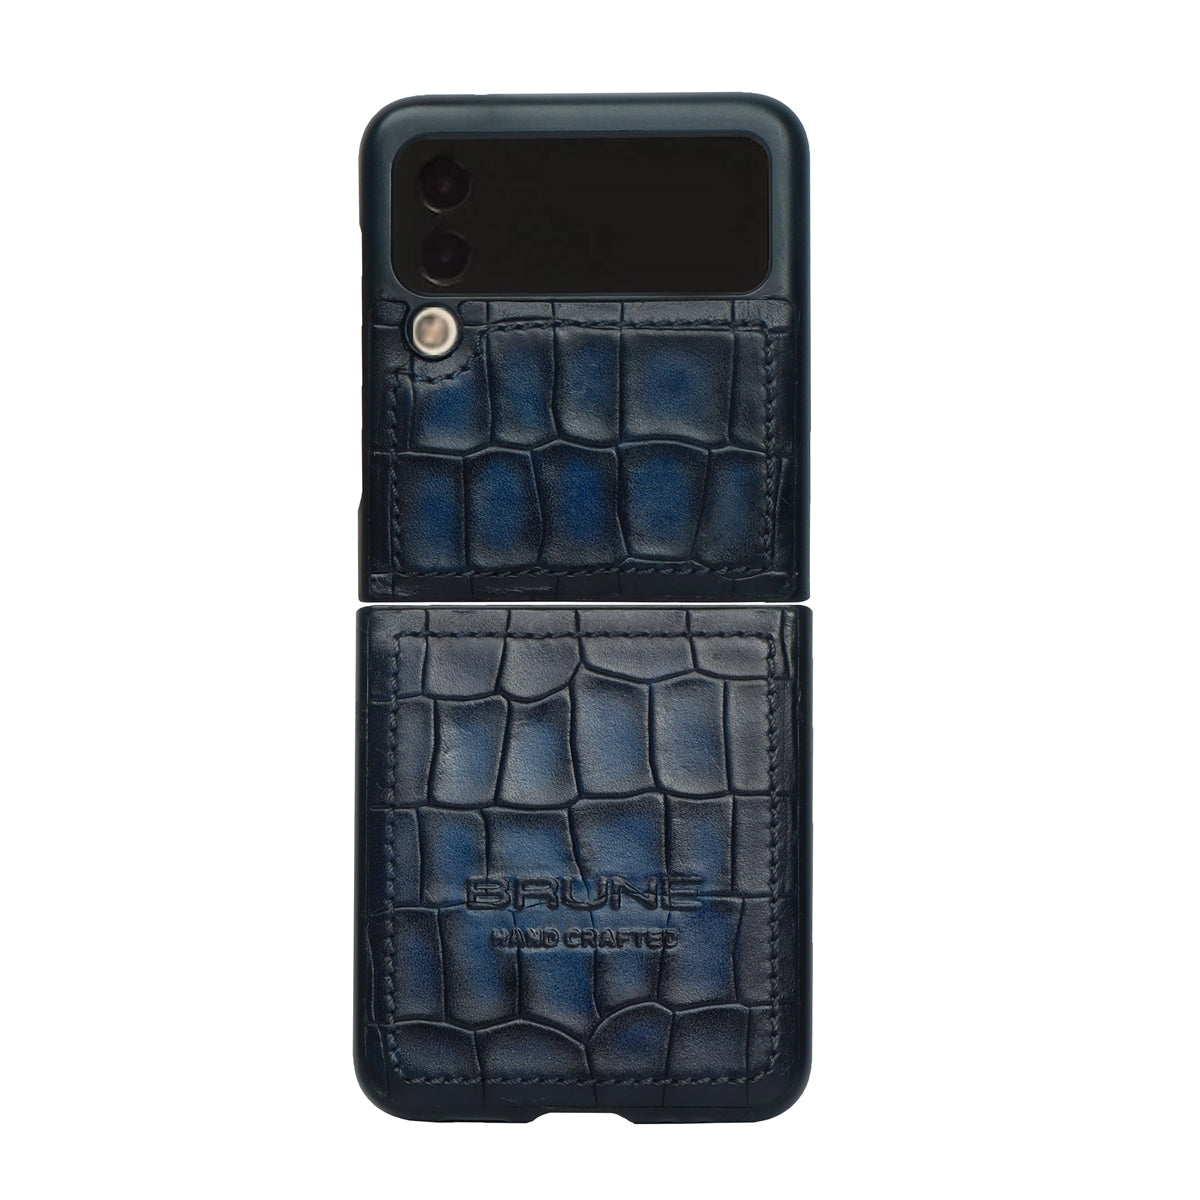 Samsung Galaxy Flip Series Blue Deep Croco Textured Leather Mobile Cover by Brune & Bareskin